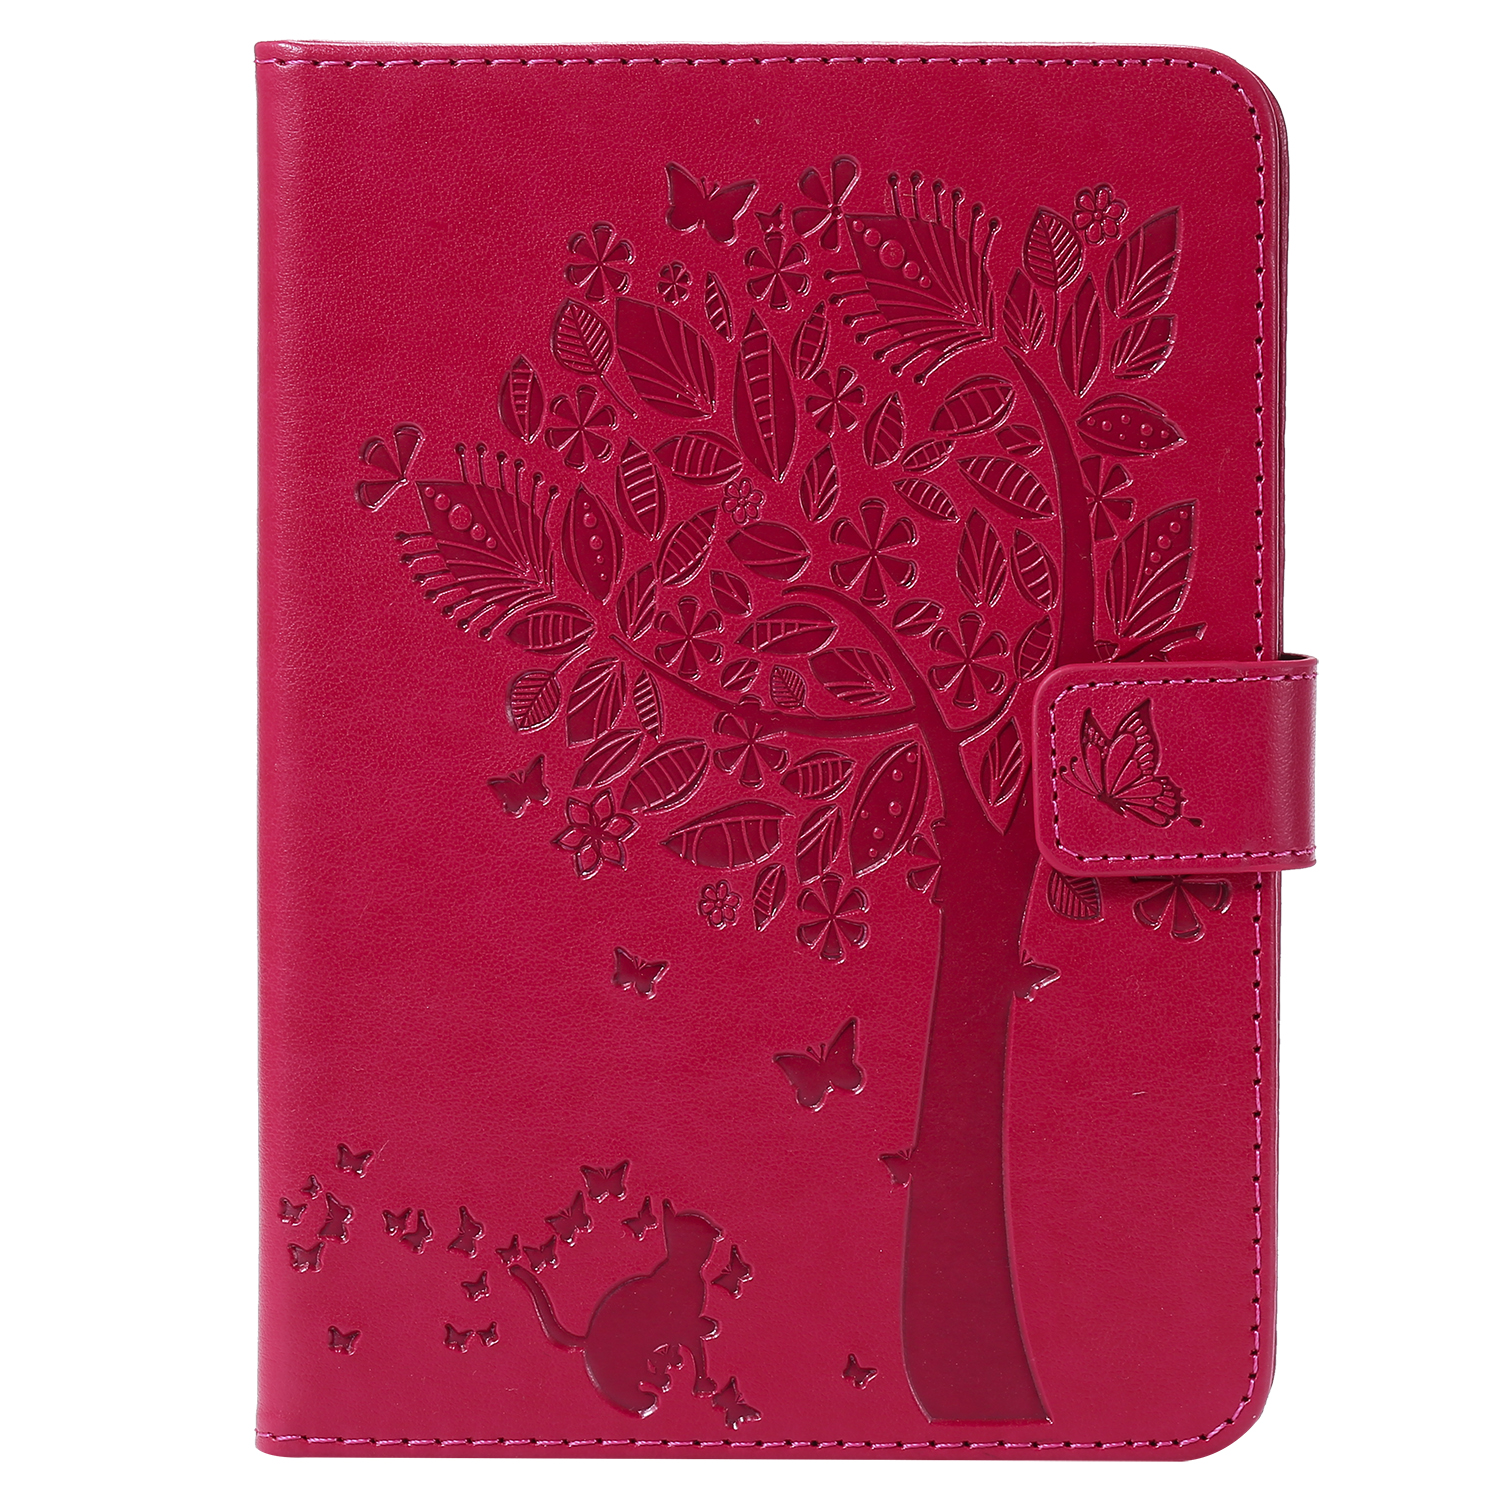 Kindle Paperwhite Case, Allytech Embossed Cat & Tree PU Leather Stand Folio Cover with Credit Card Slots for Amazon Kindle Paperwhite ( Fit All Paperwhite Generations Prior to 2018),, Red - image 3 of 9